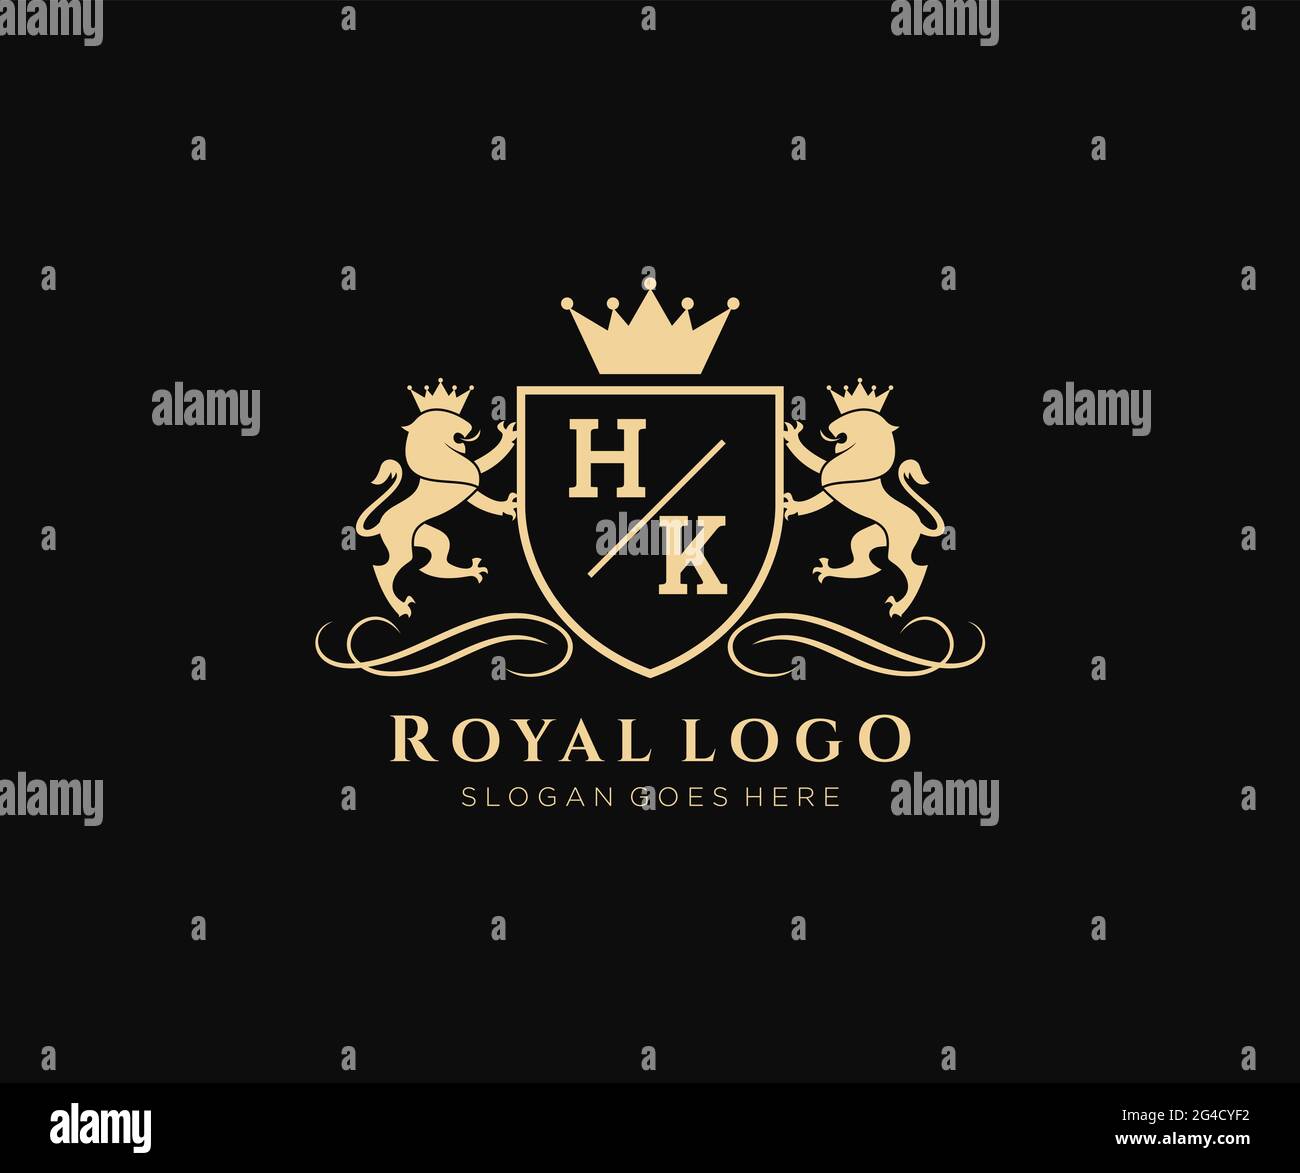 HK Letter Lion Royal Luxury Heraldic,Crest Logo template in vector art for Restaurant, Royalty, Boutique, Cafe, Hotel, Heraldic, Jewelry, Fashion and Stock Vector